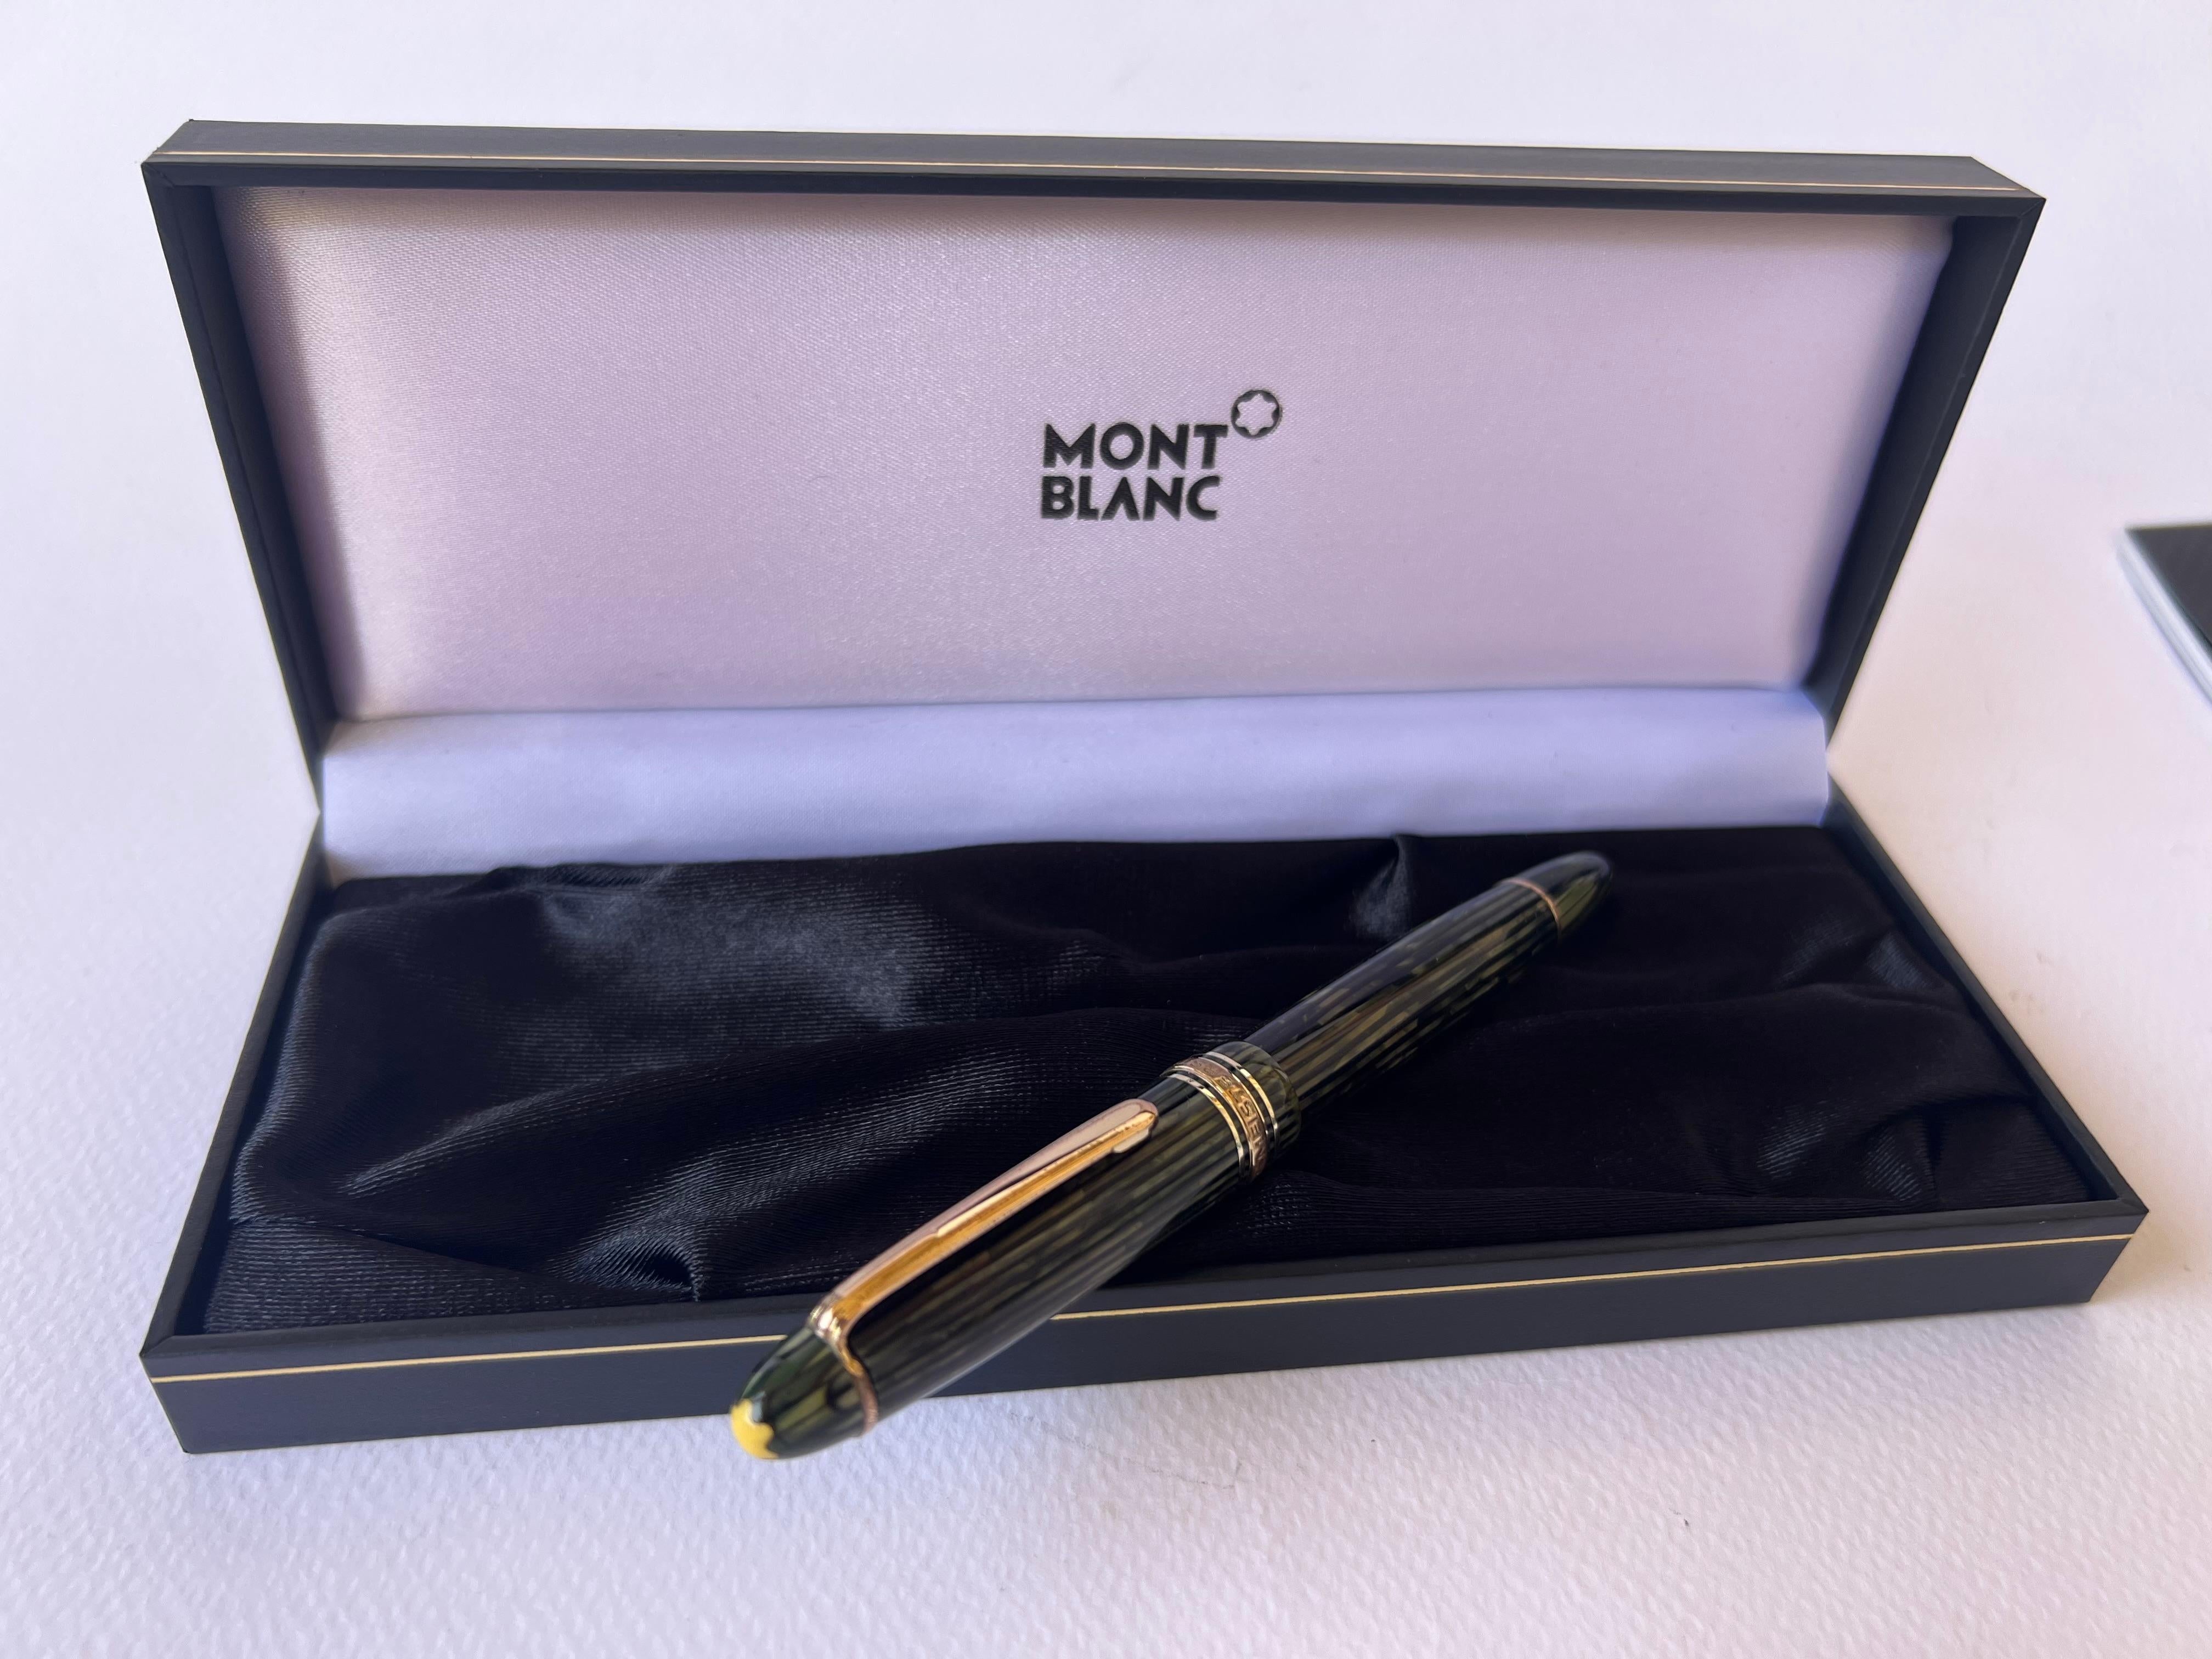 Montblanc Masterpiece c1950s Celluloid Green Striated 144g Fountain pen 14k Flex In Excellent Condition For Sale In Toronto, CA